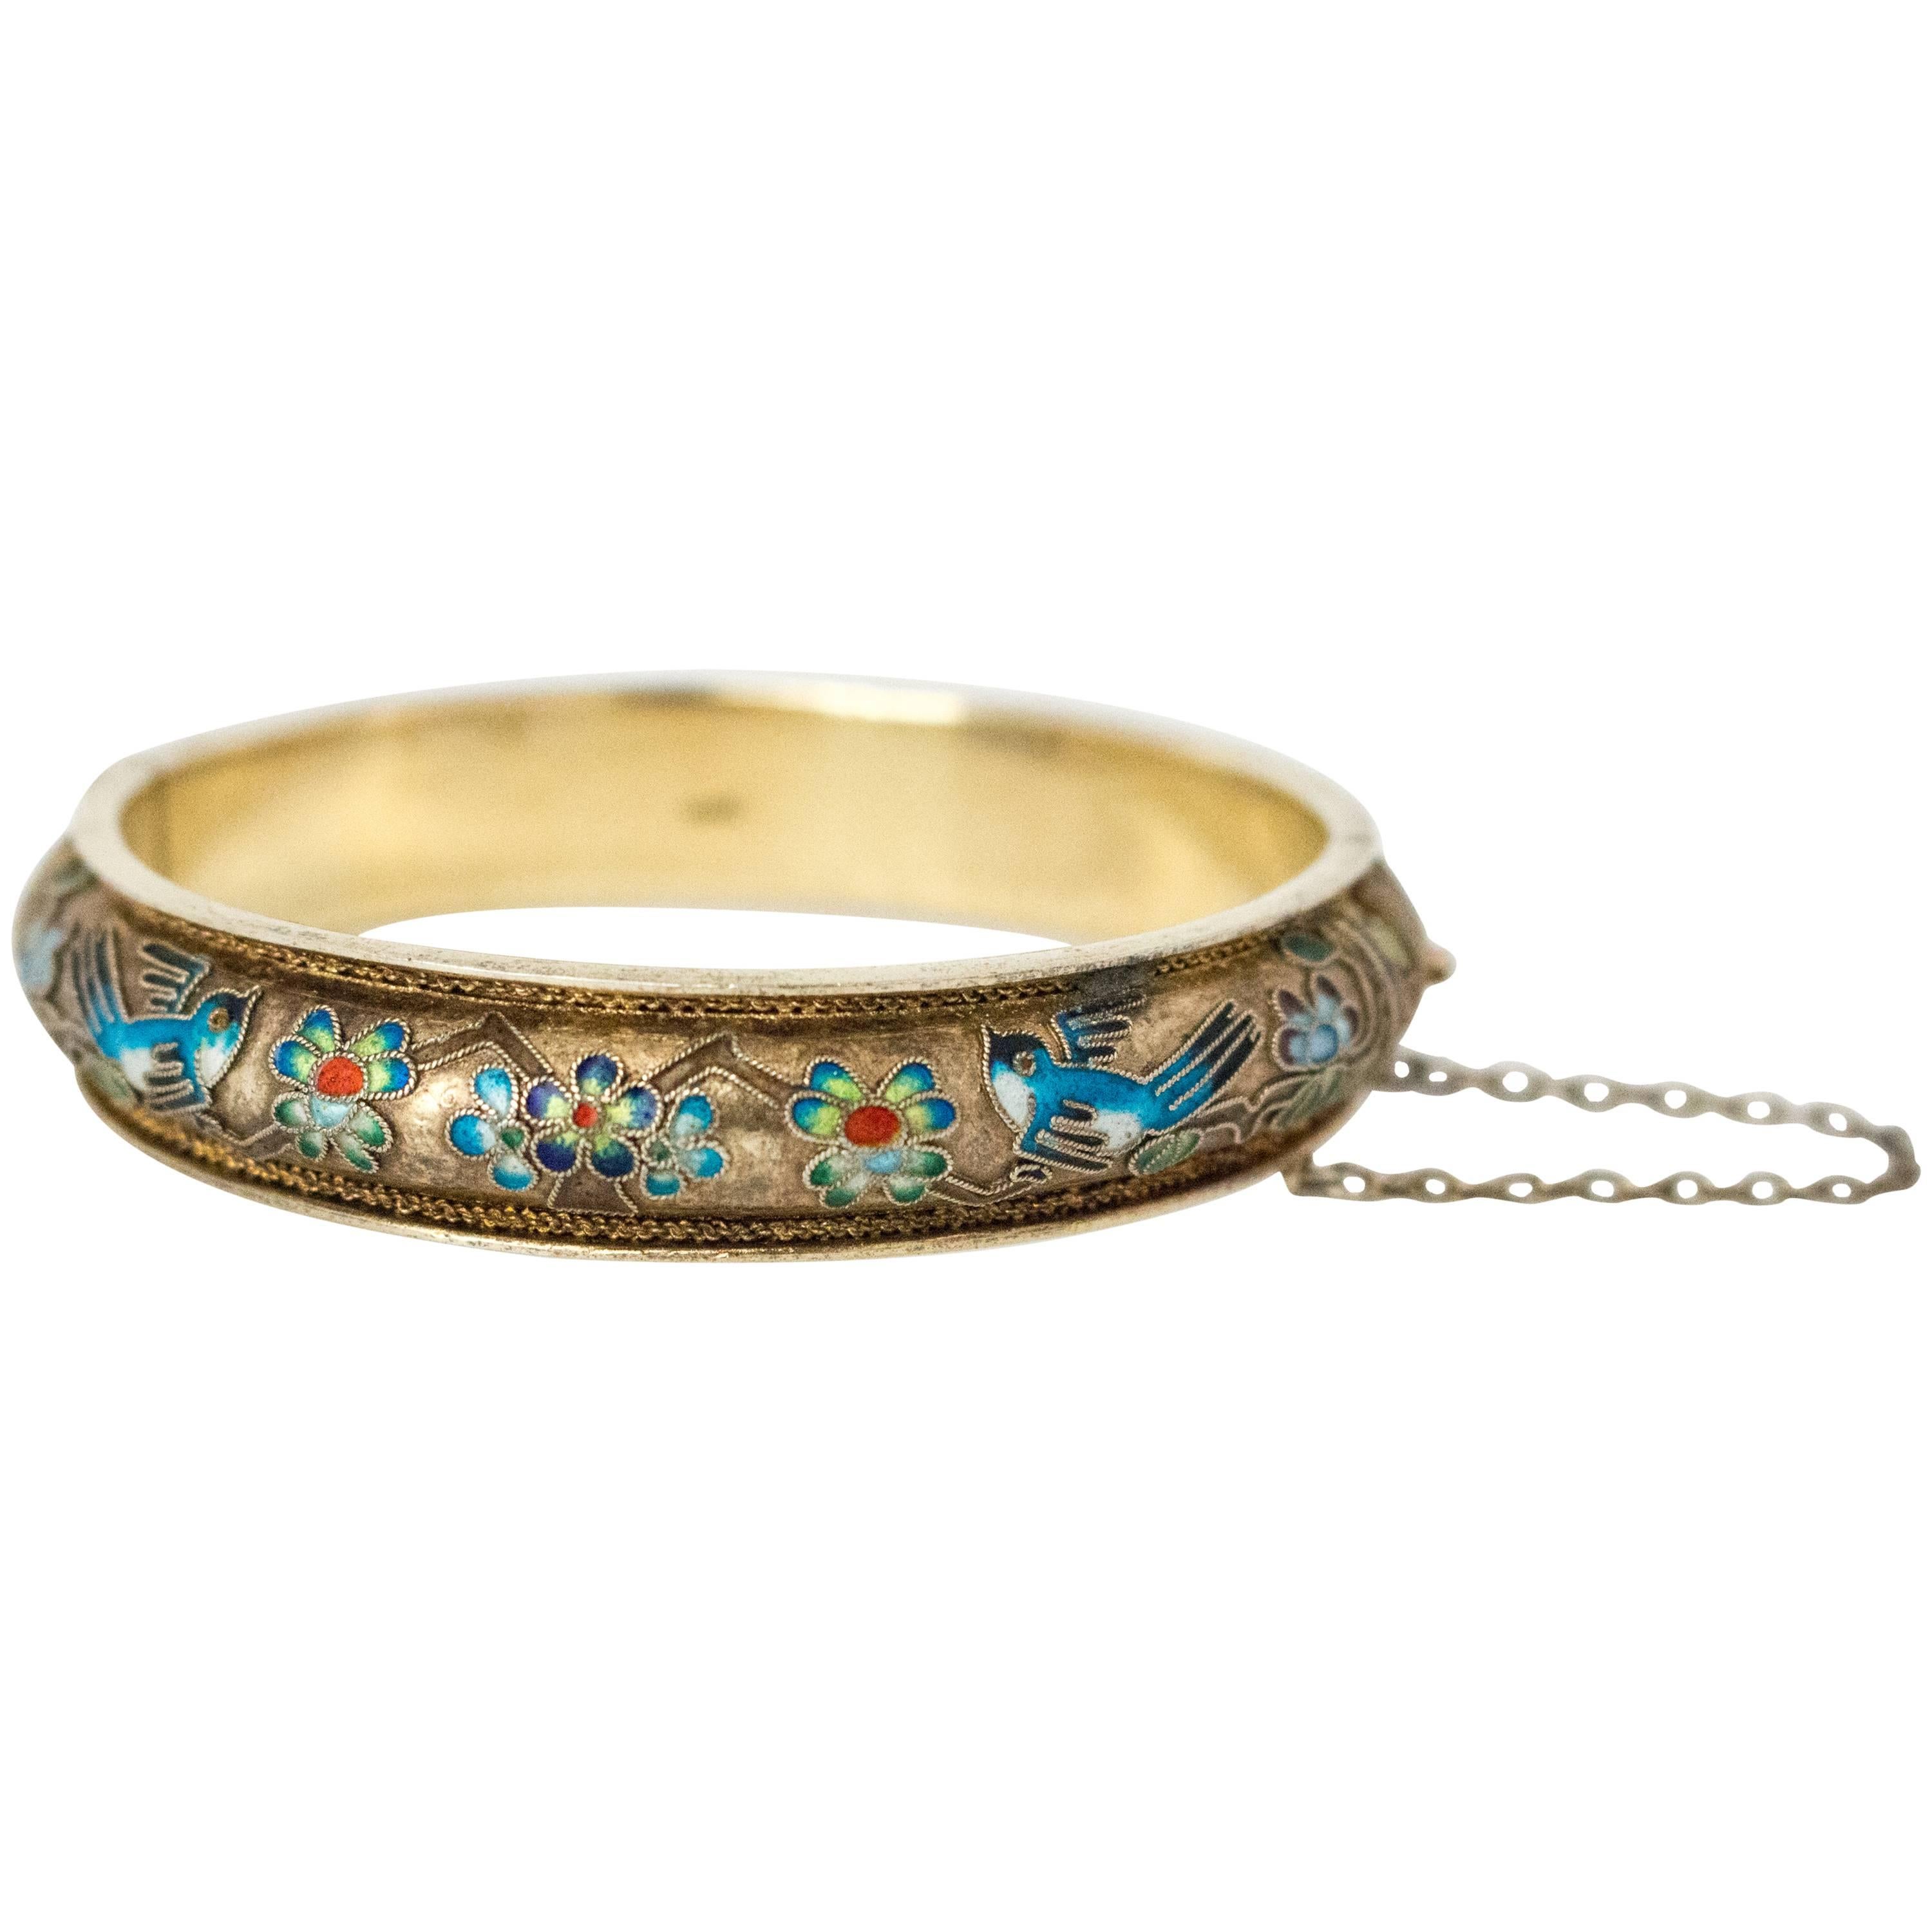 50s Champleve Silver Bangle with a Gold Wash, Enamel Blue Birds & Flowers